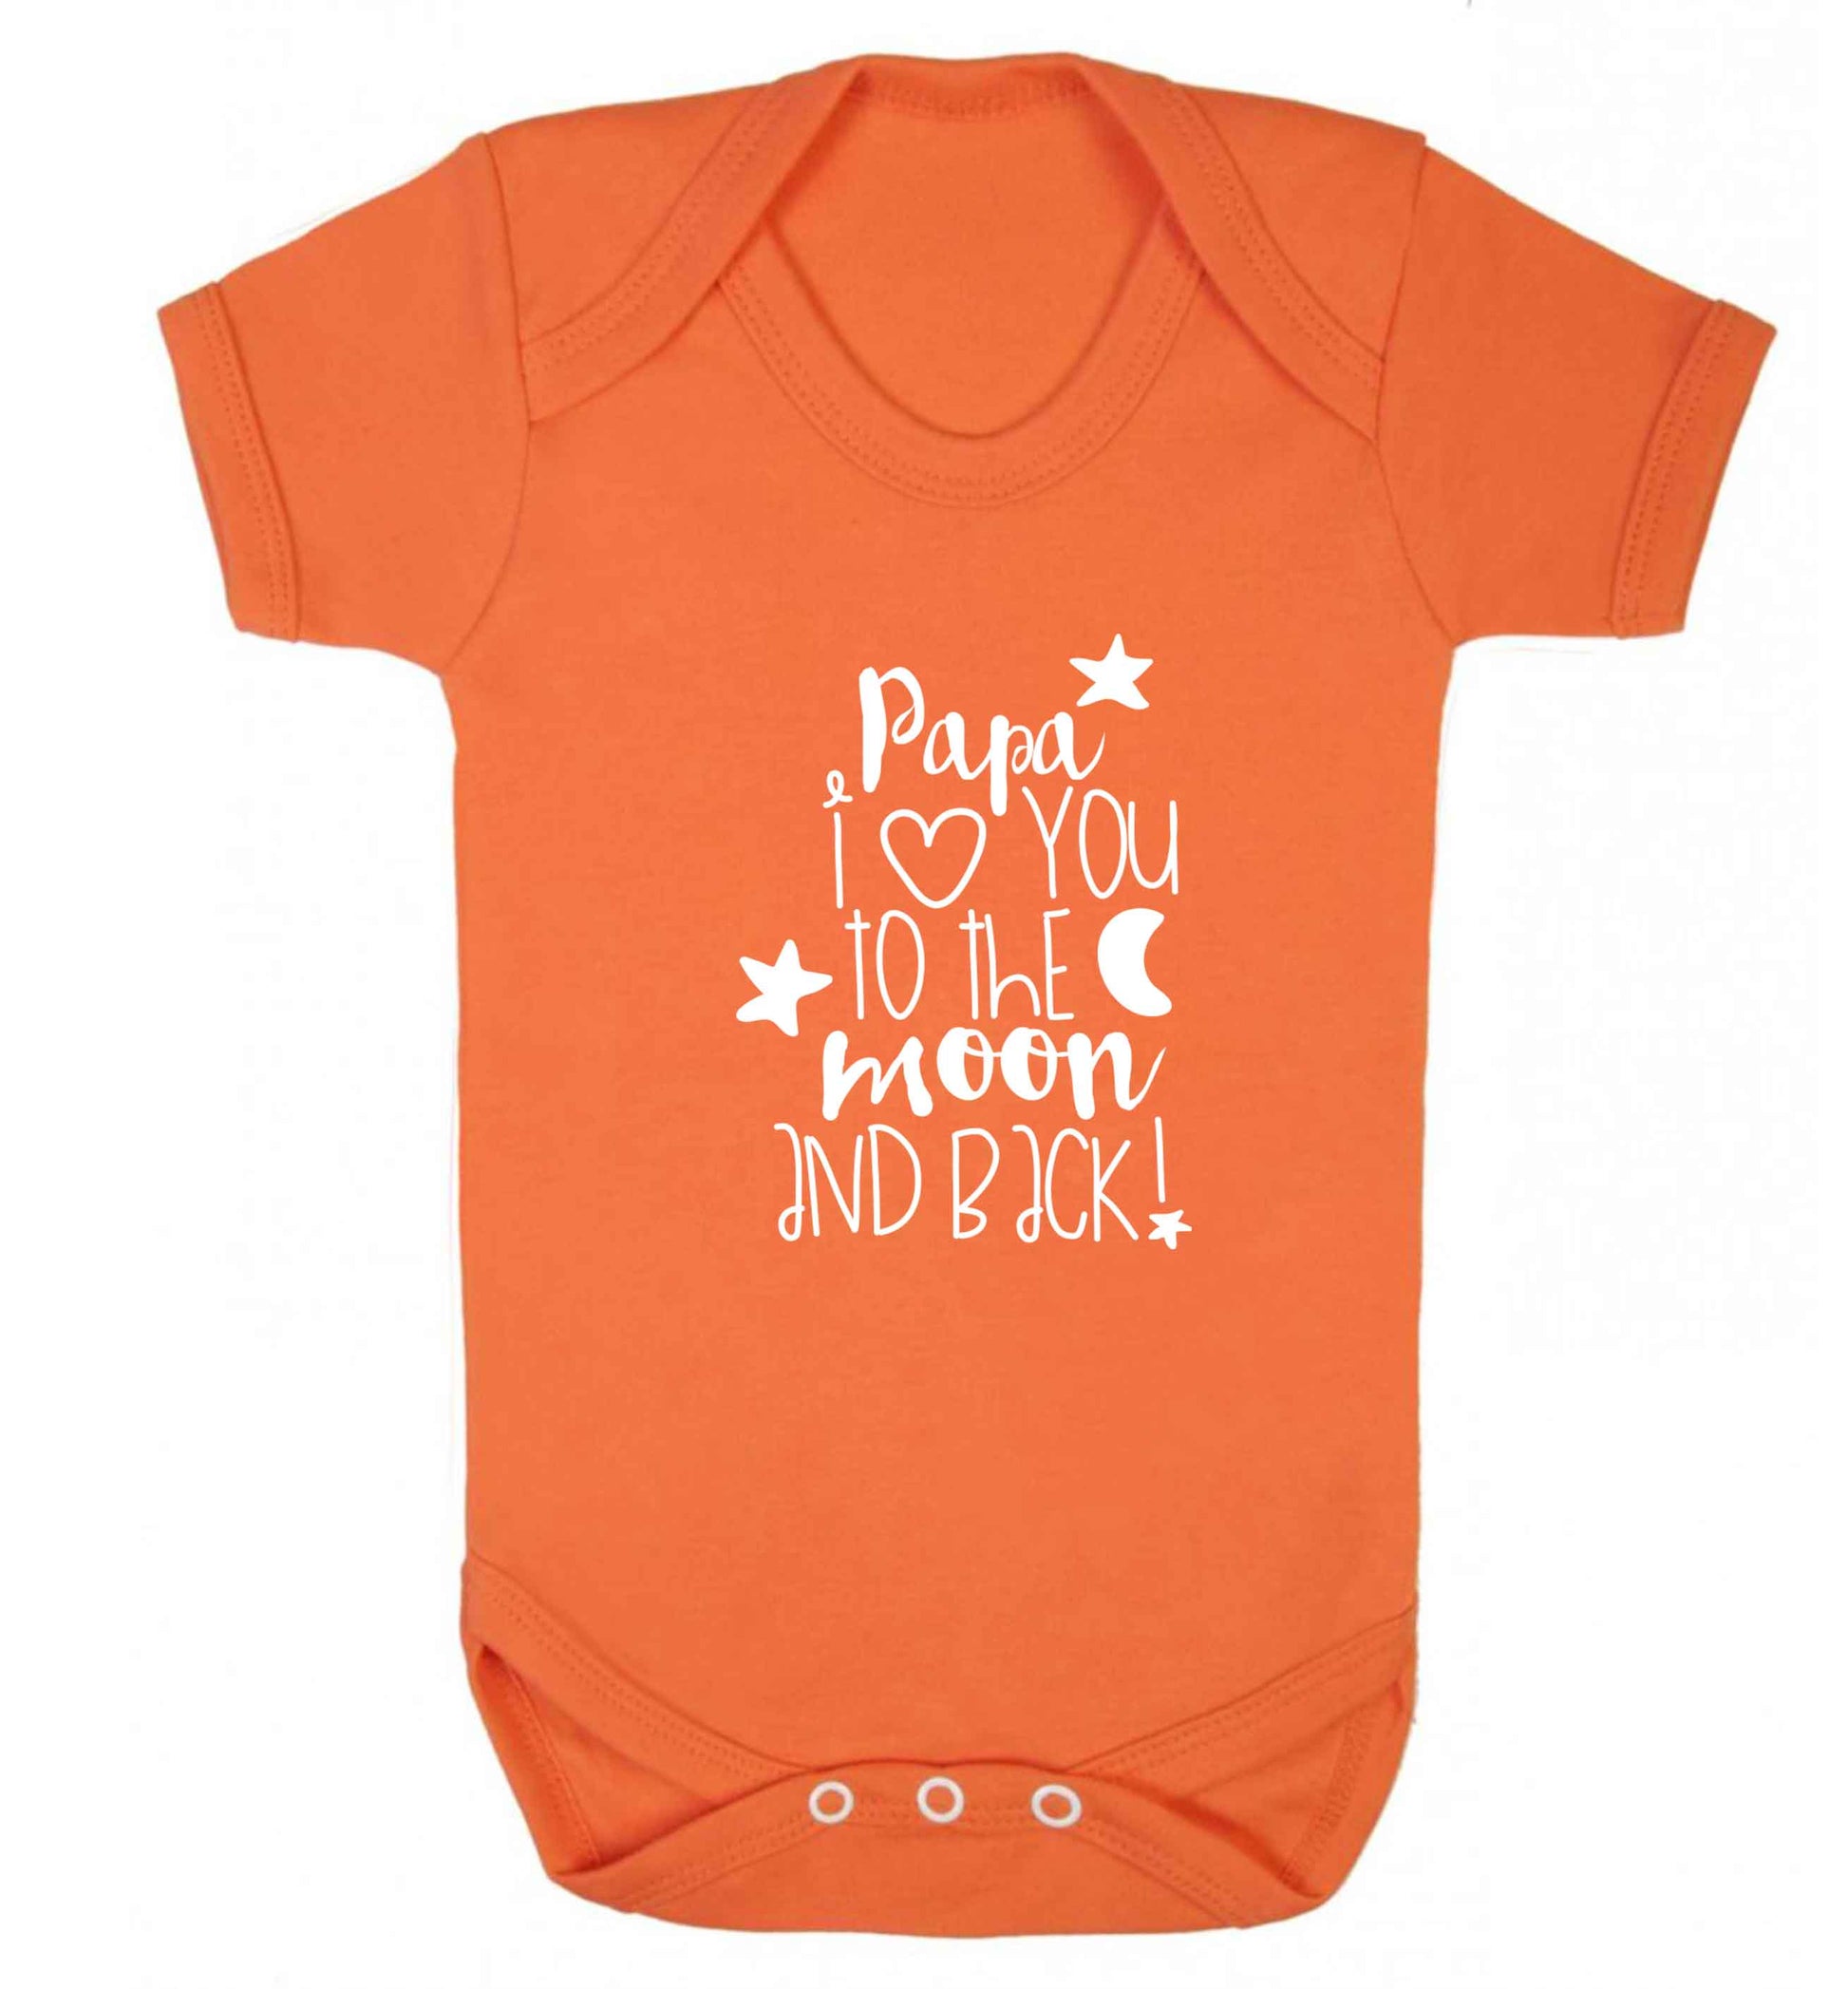 Papa I love you to the moon and back baby vest orange 18-24 months